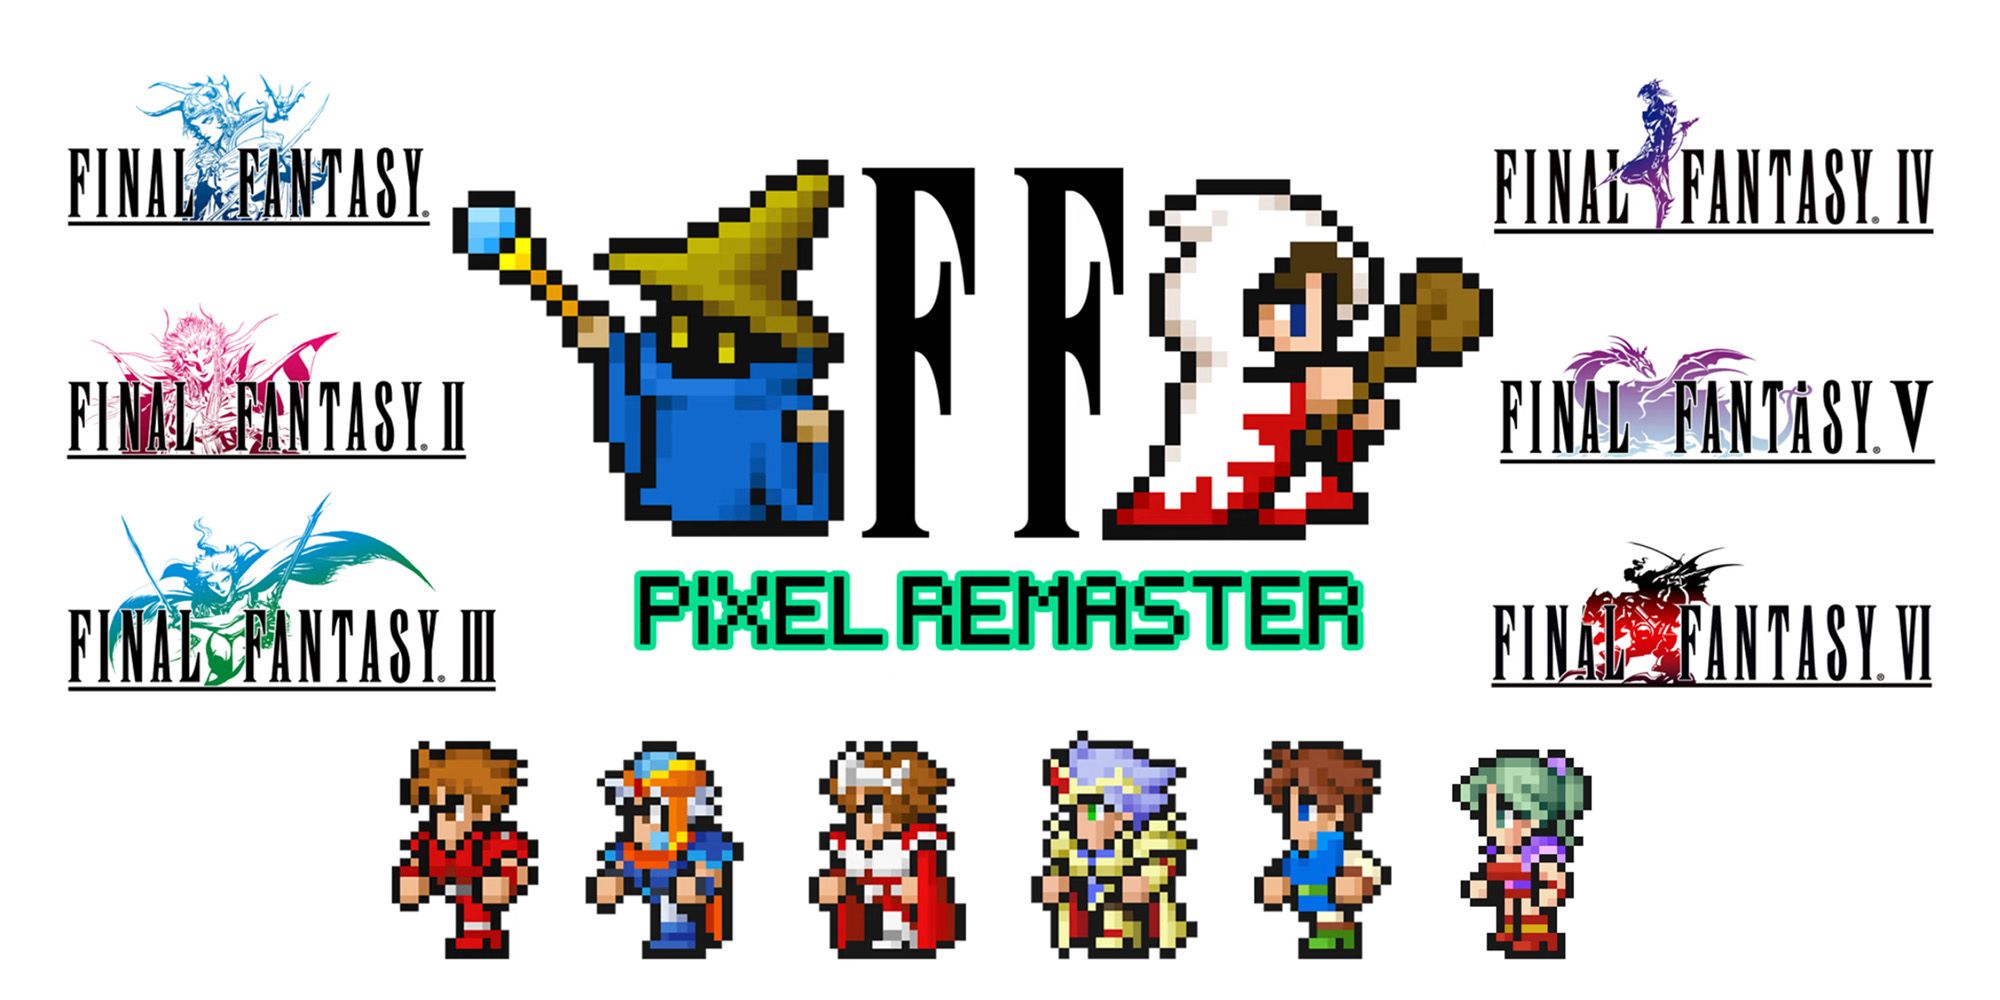 Final Fantasy Pixel Remaster - Characters From The First Six Final Fantasy Games On A White Background